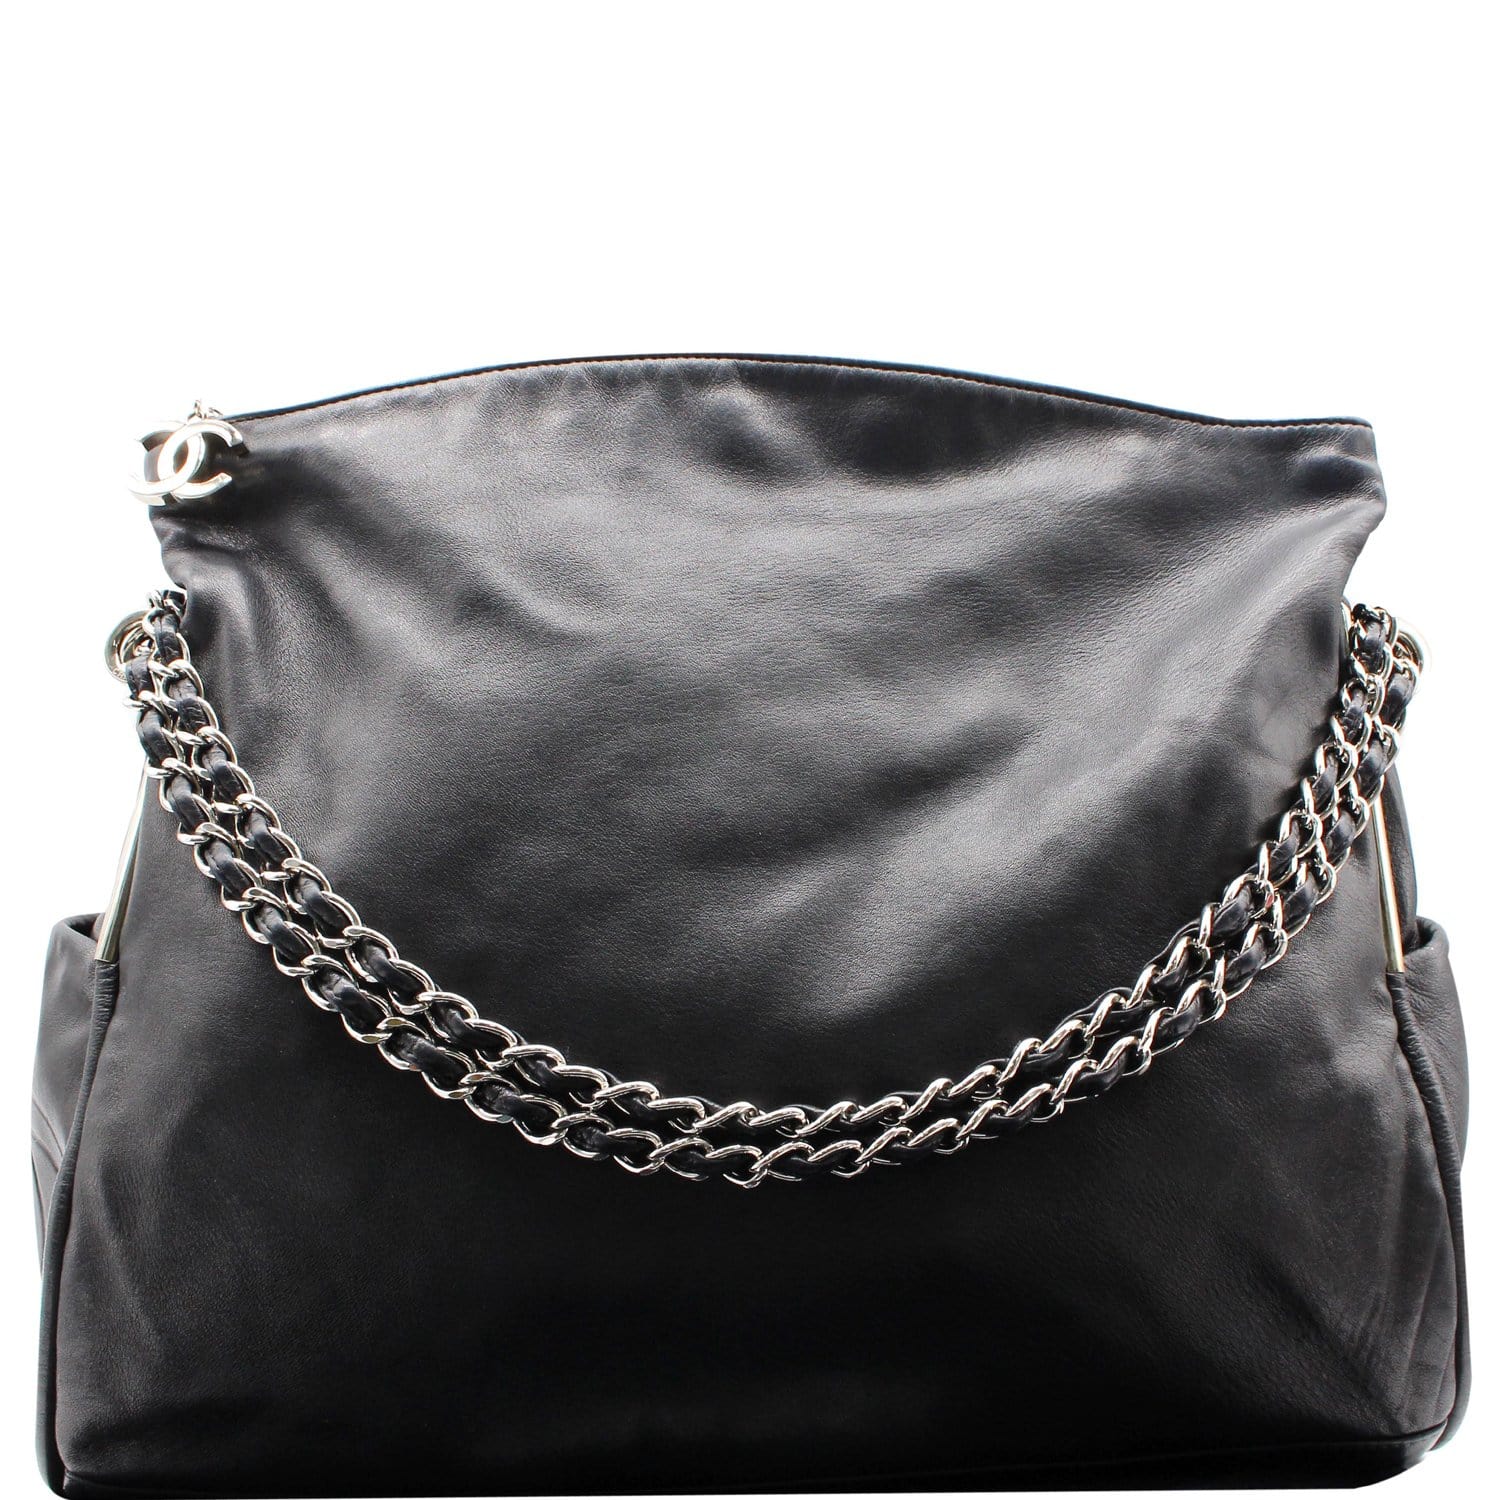 CHANEL Lambskin Large Soft and Chain Hobo Black 1271449